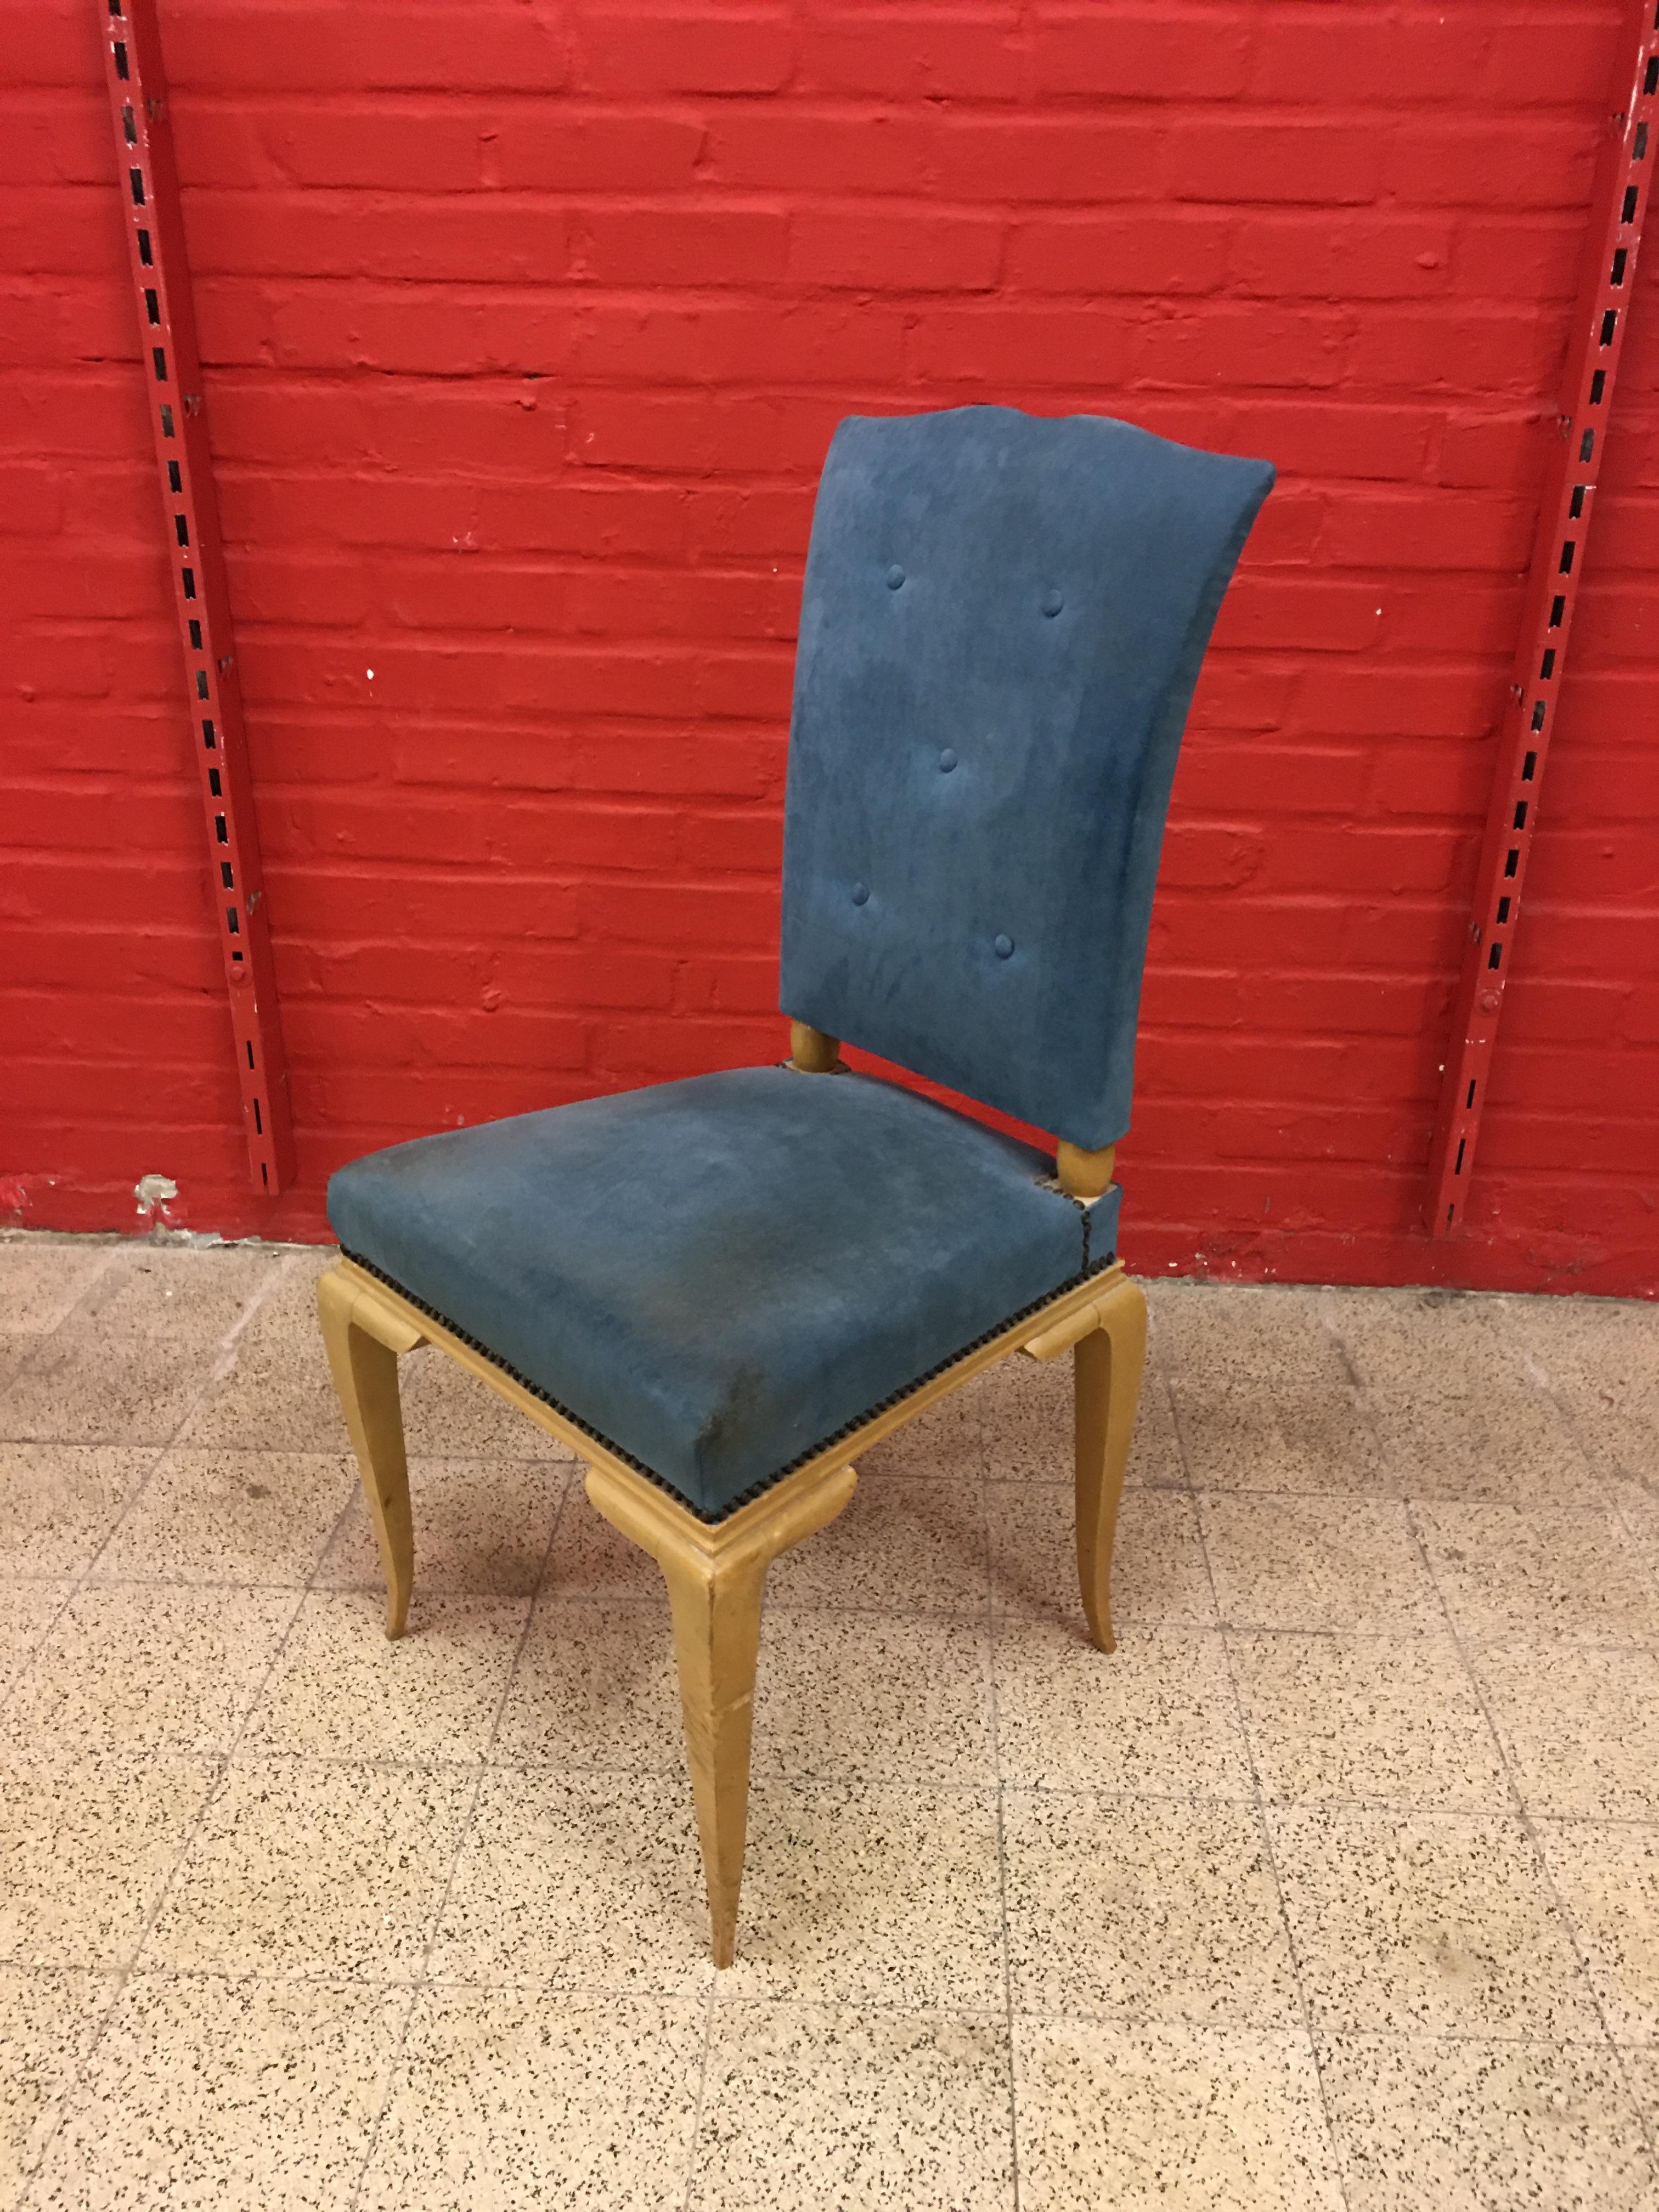 René Prou, Art Deco Chair in Lacquered Wood and Blue Velvet, circa 1940-1950 For Sale 3